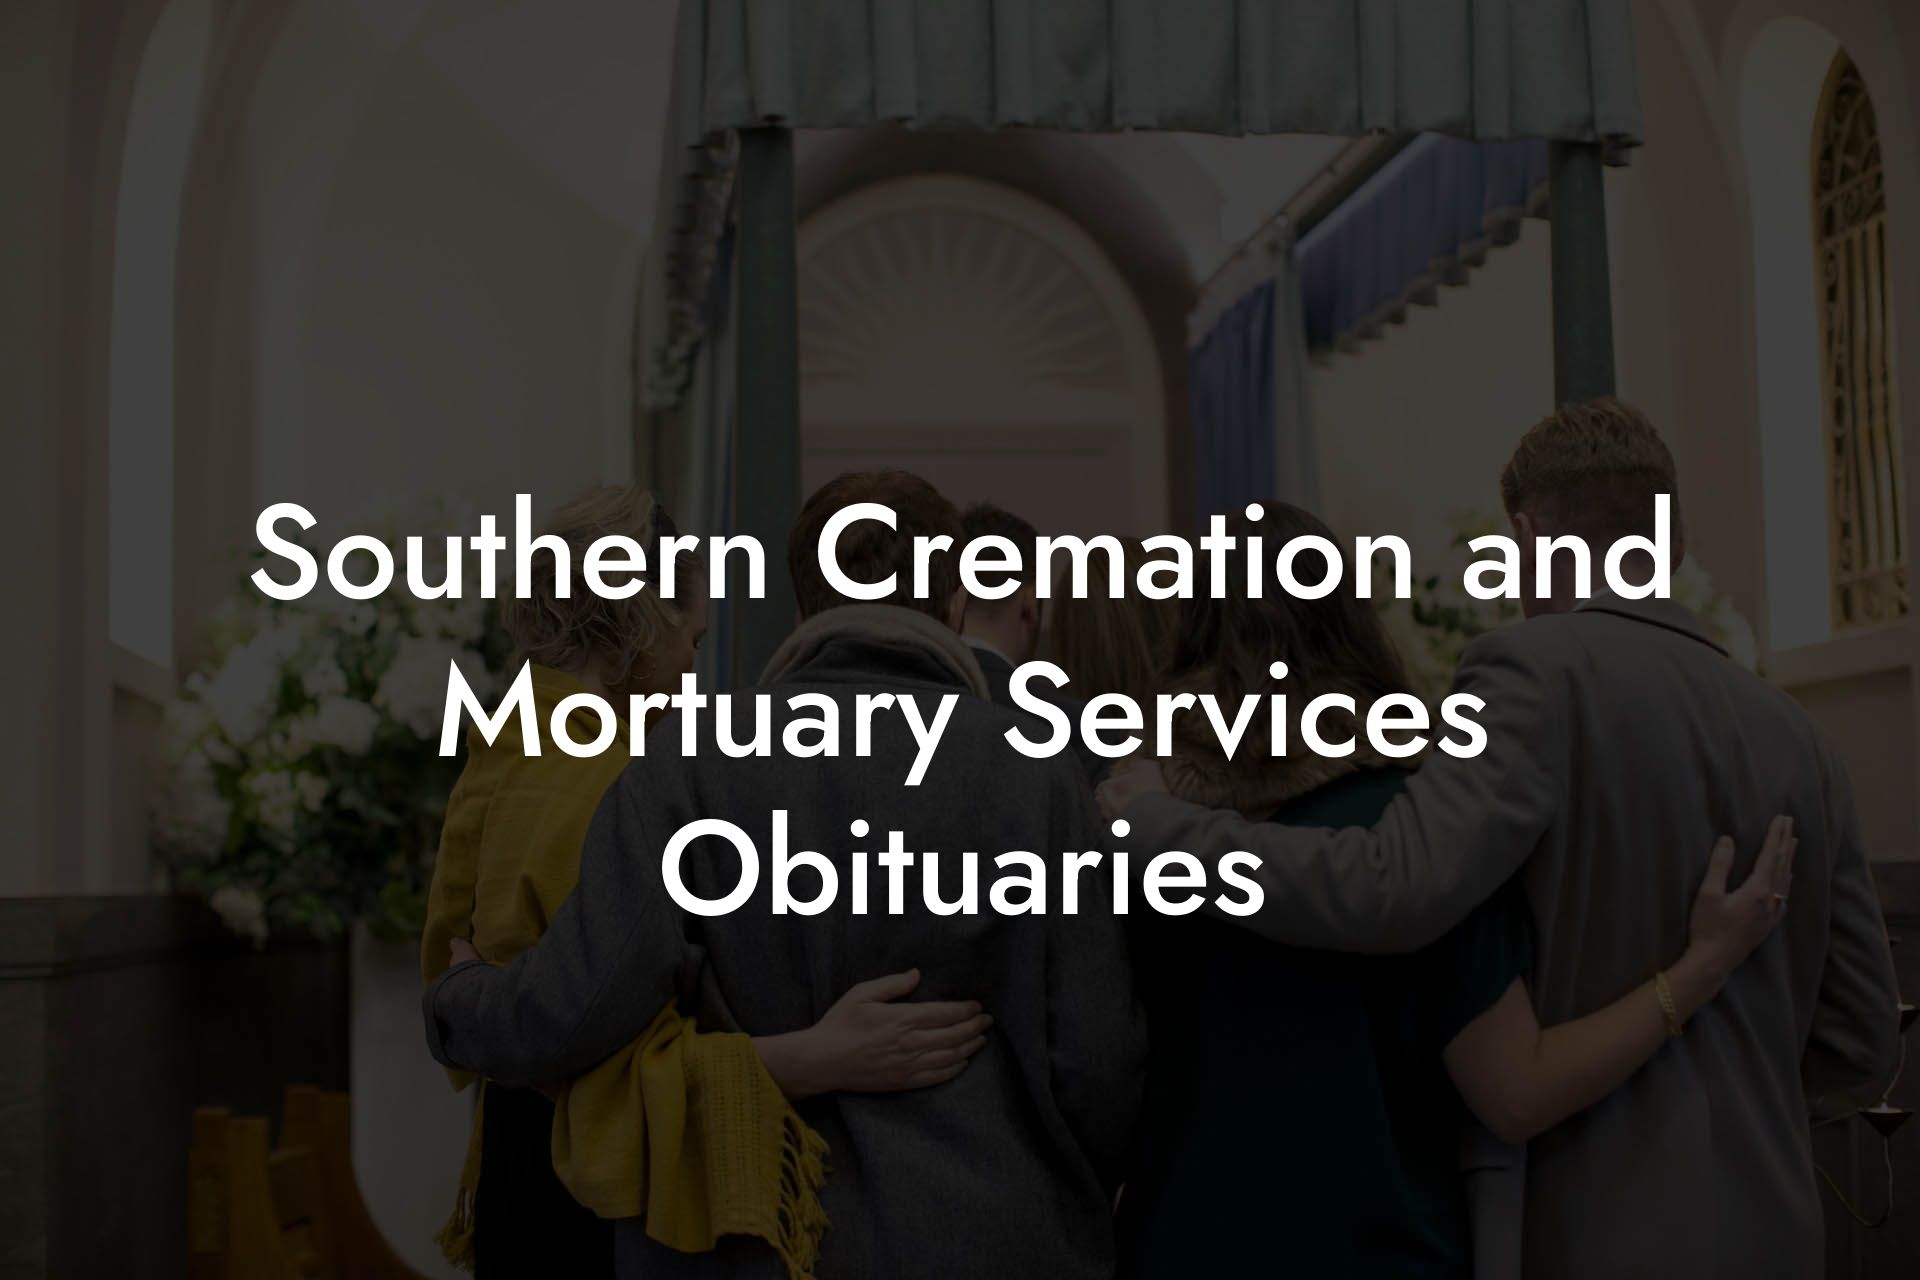 Southern Cremation and Mortuary Services Obituaries